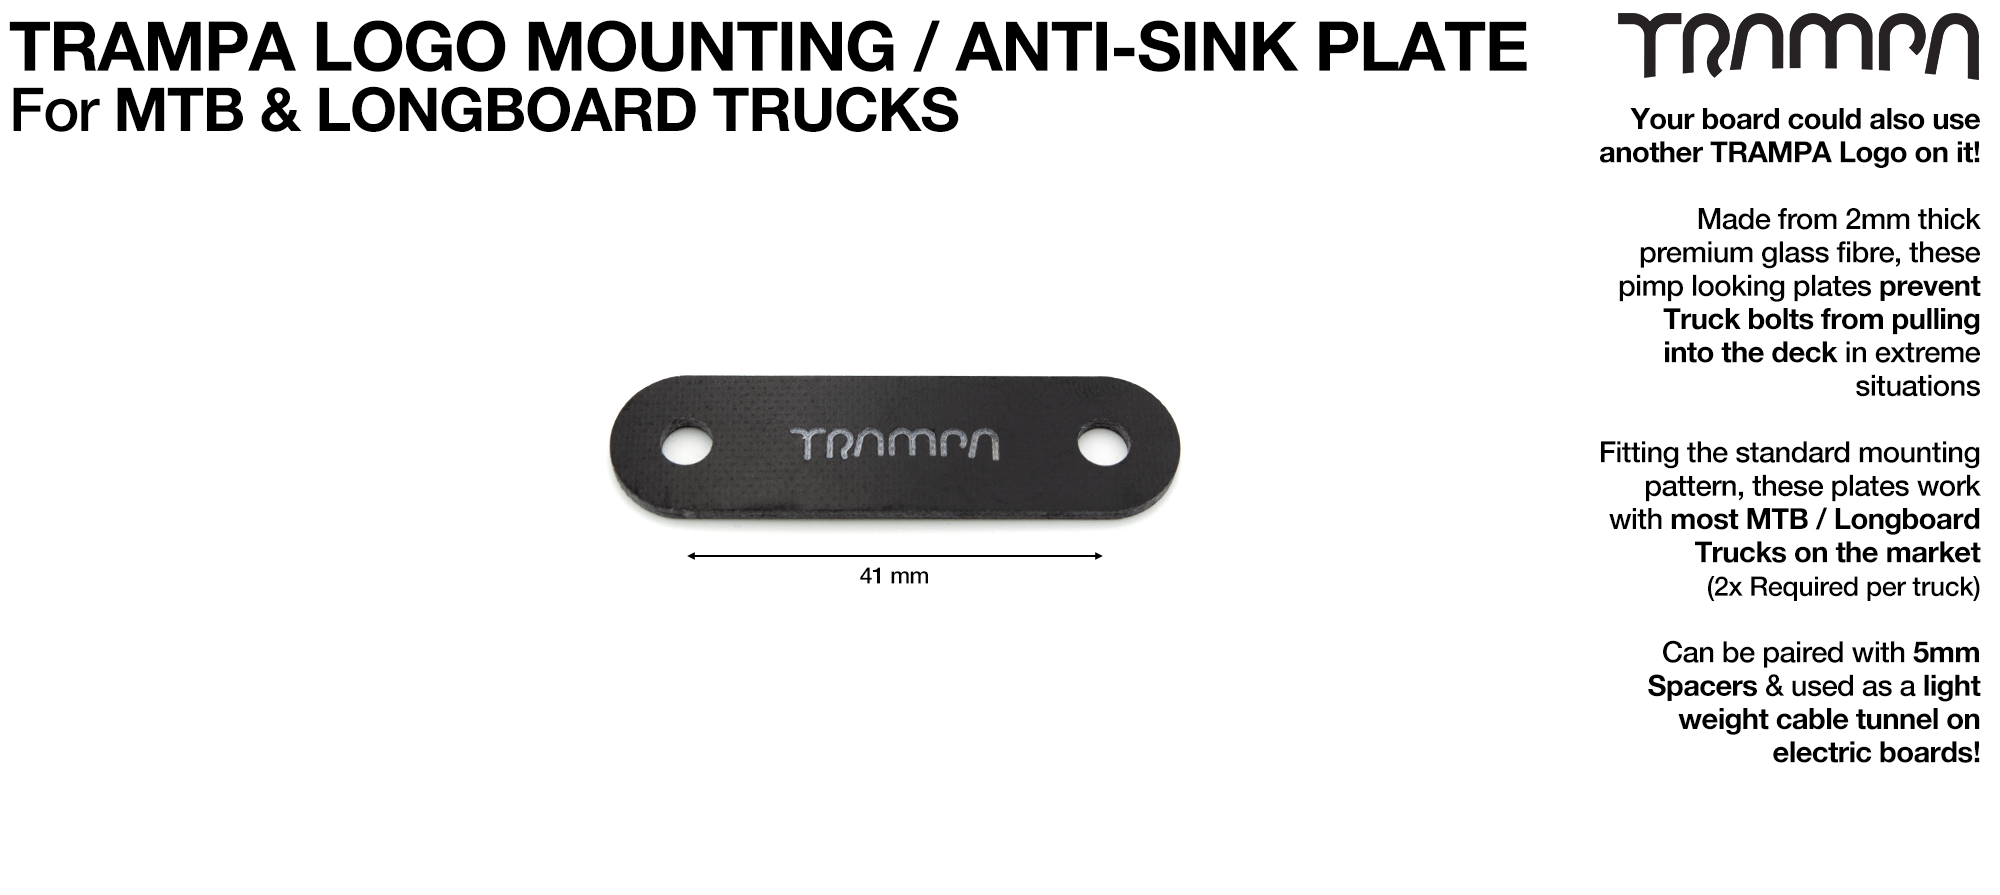 TRAMPA LOGO Truck Bolt Mounting Panel / Anti-Sink Plate / Cable Tidy